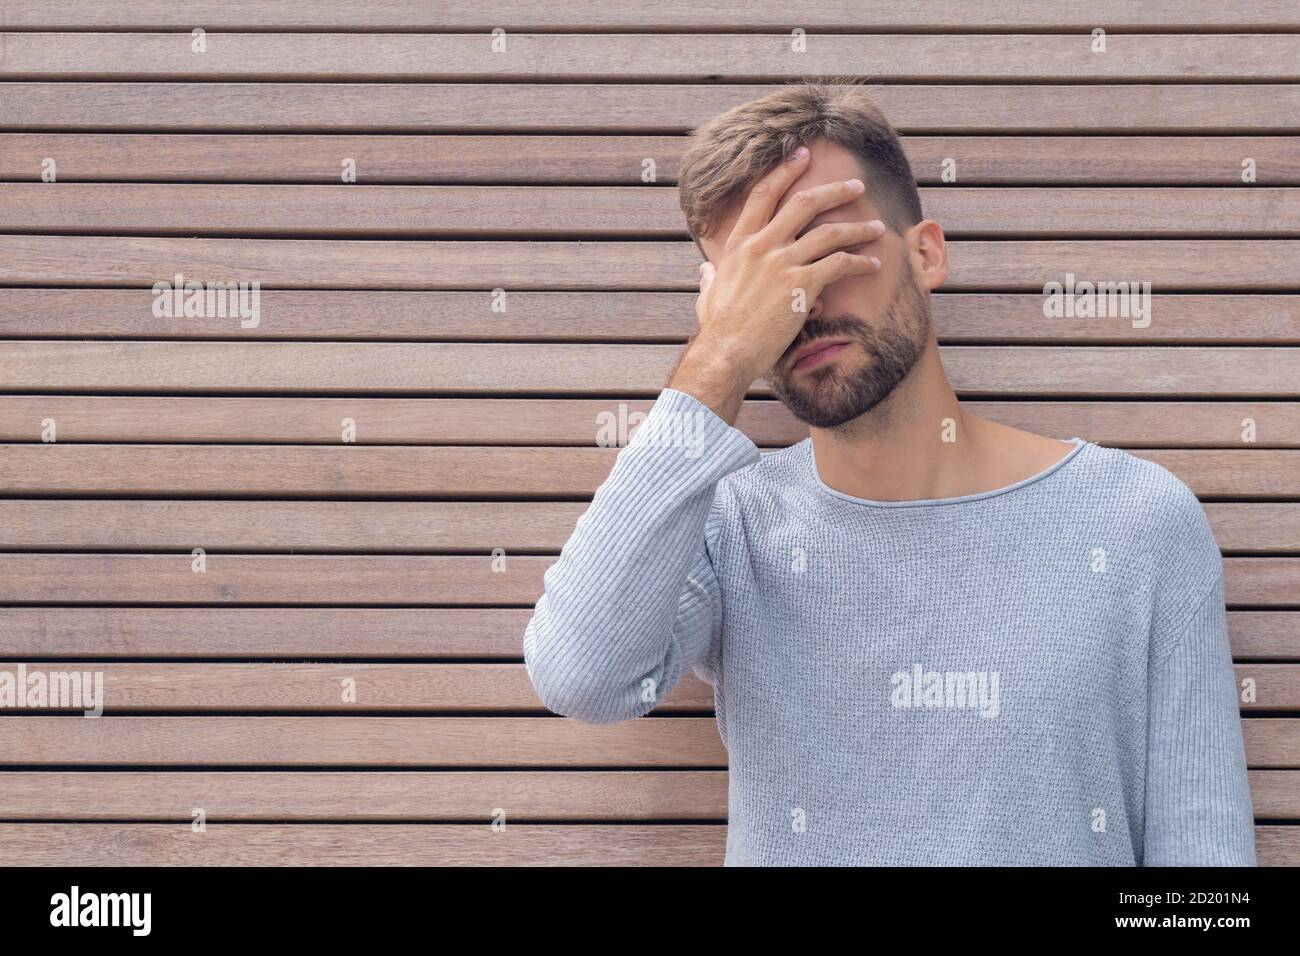 Facepalm. Ashamed embarrassed man covering his face. Young guy on wooden wall background with copy space. Emotion facial expression and feelings conce Stock Photo